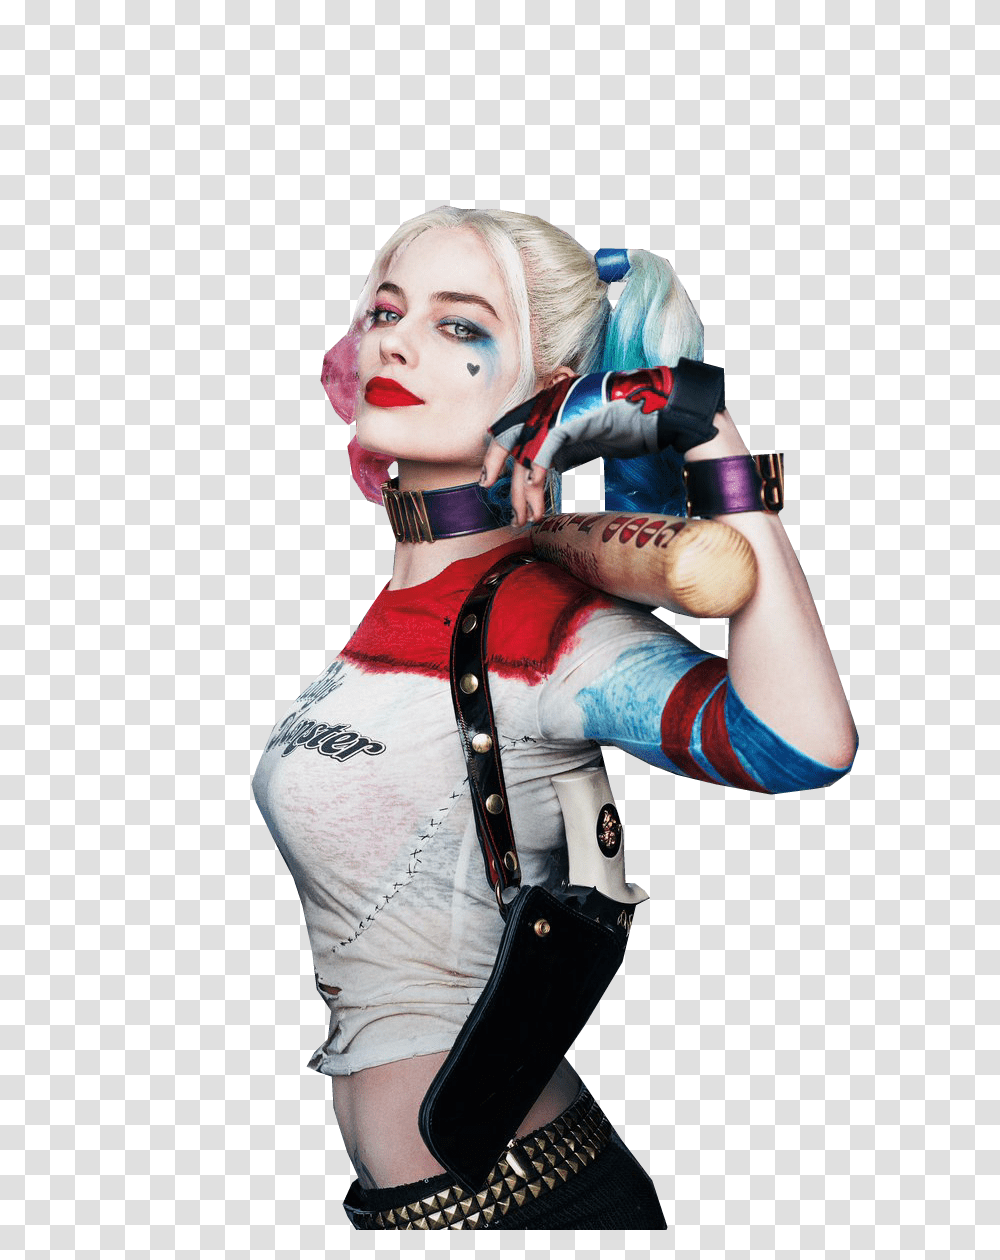 Harley Quinn Images Free Download, Costume, Skin, Person, Performer Transparent Png